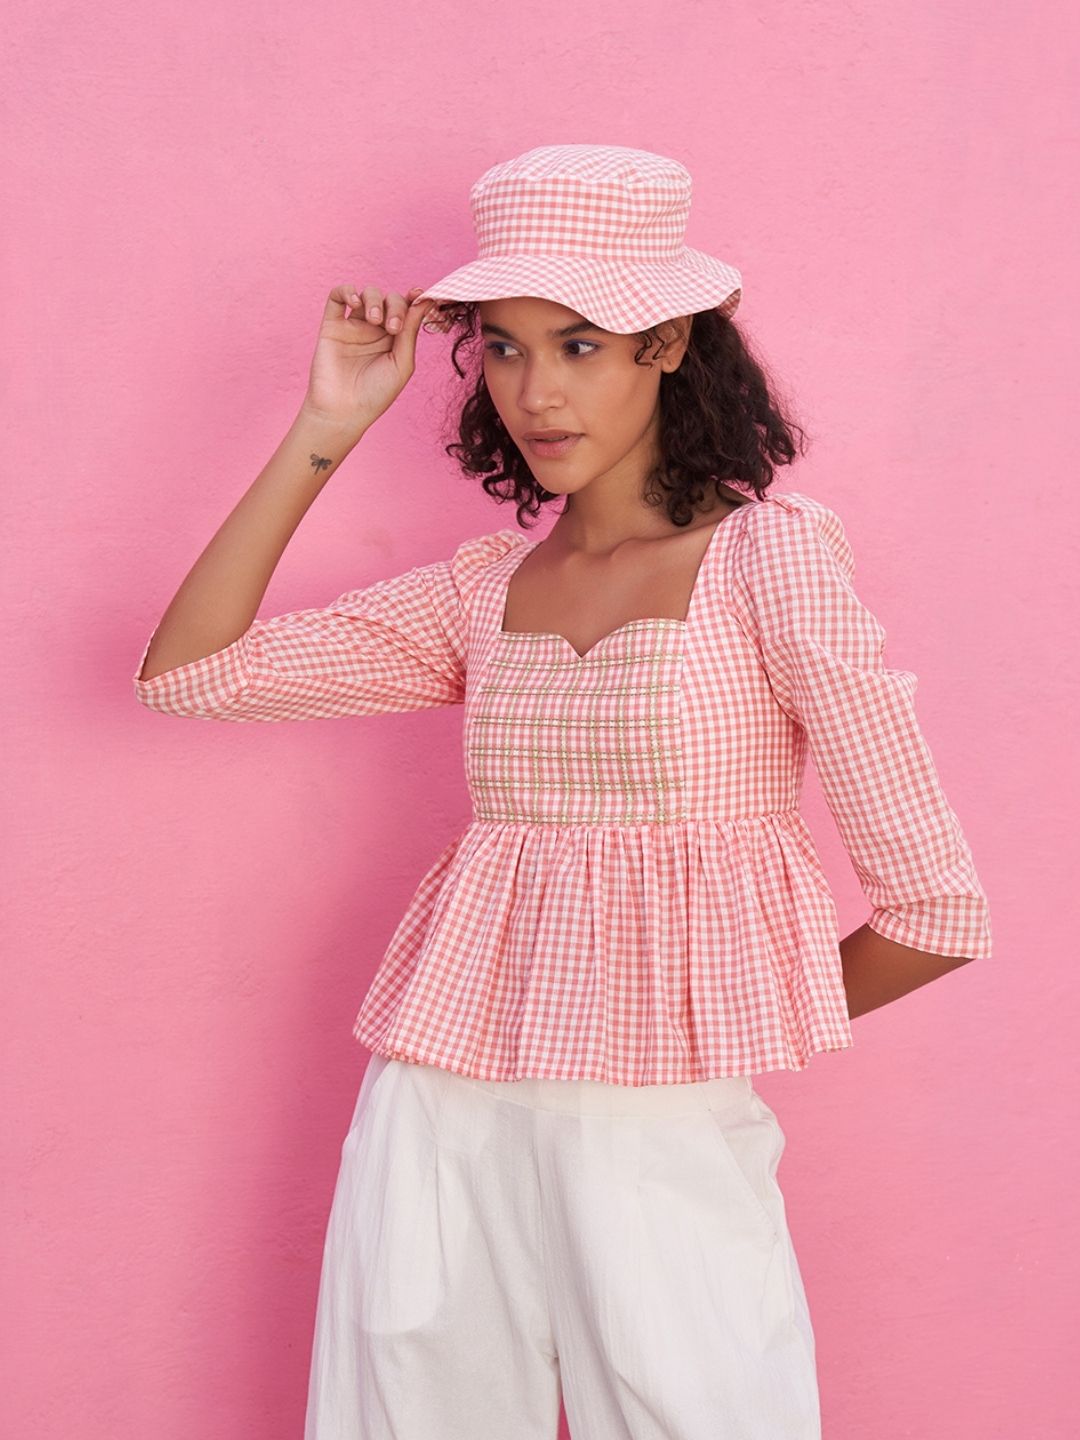 Peplum Top in Gingham Checks with Sweetheart Neckline